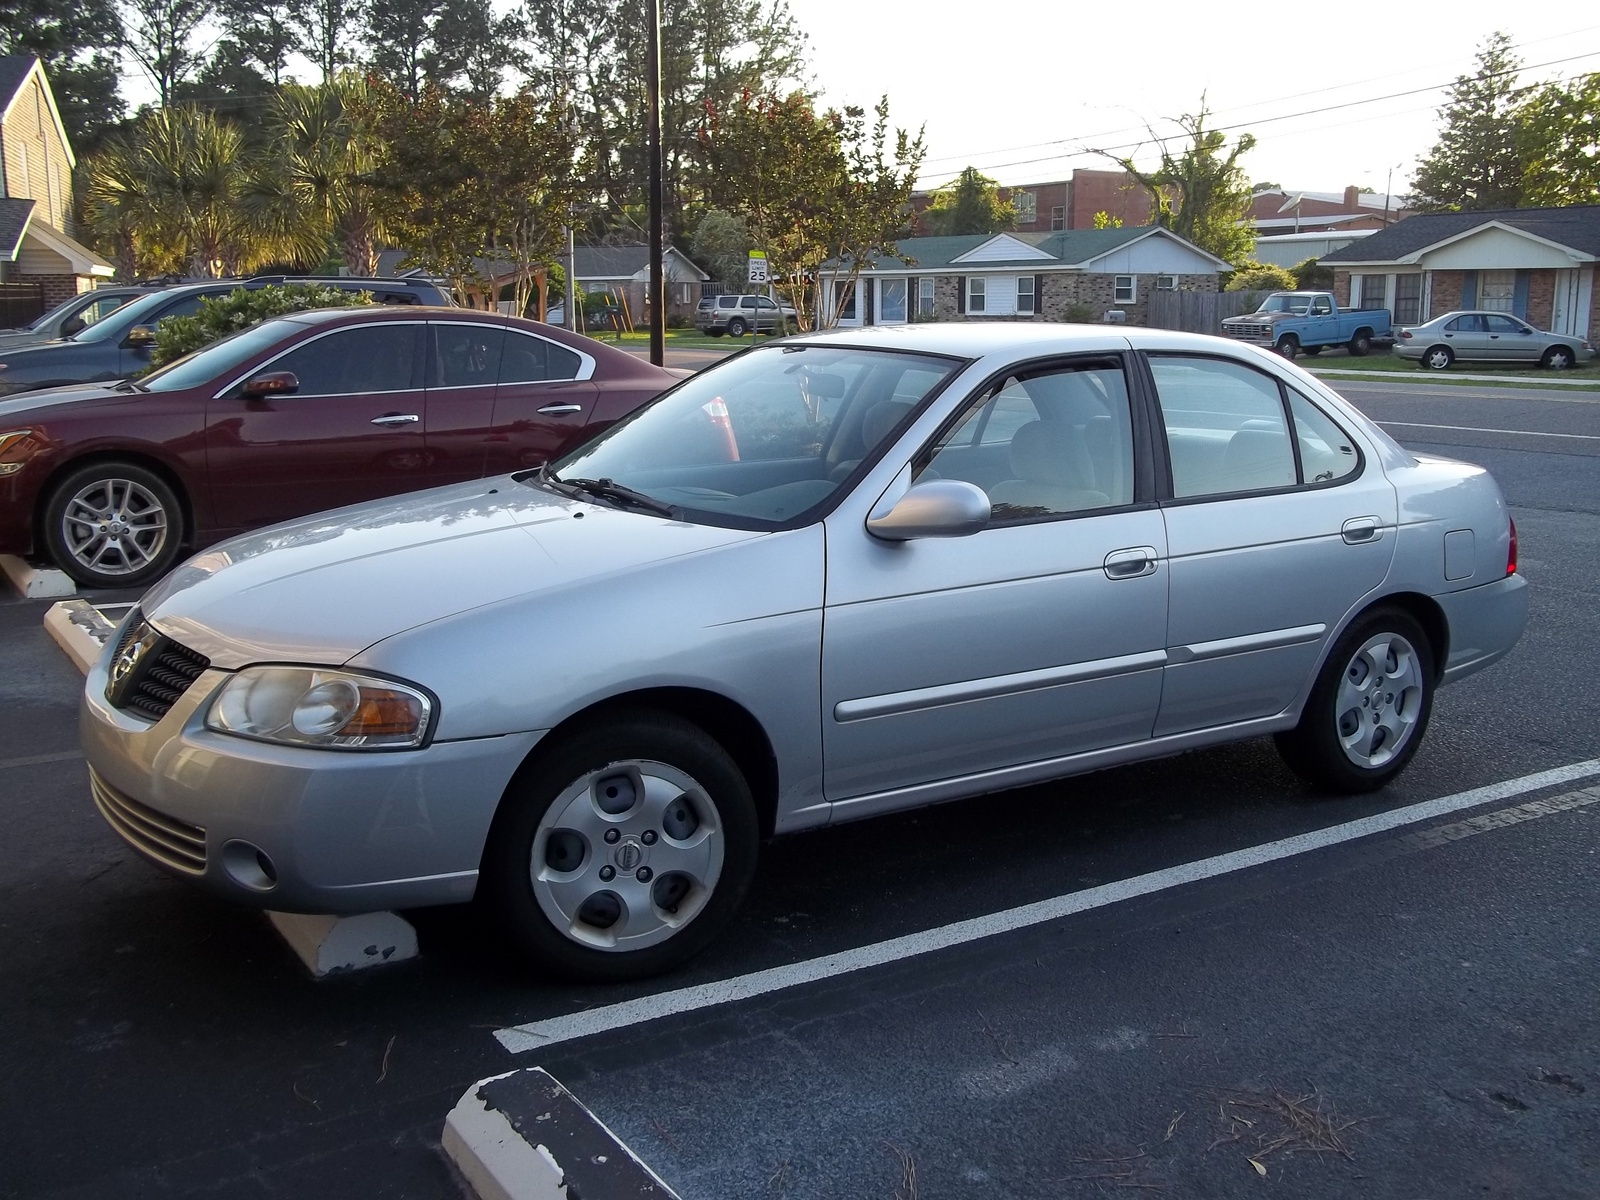 Nissan sentra s 2006 review #6